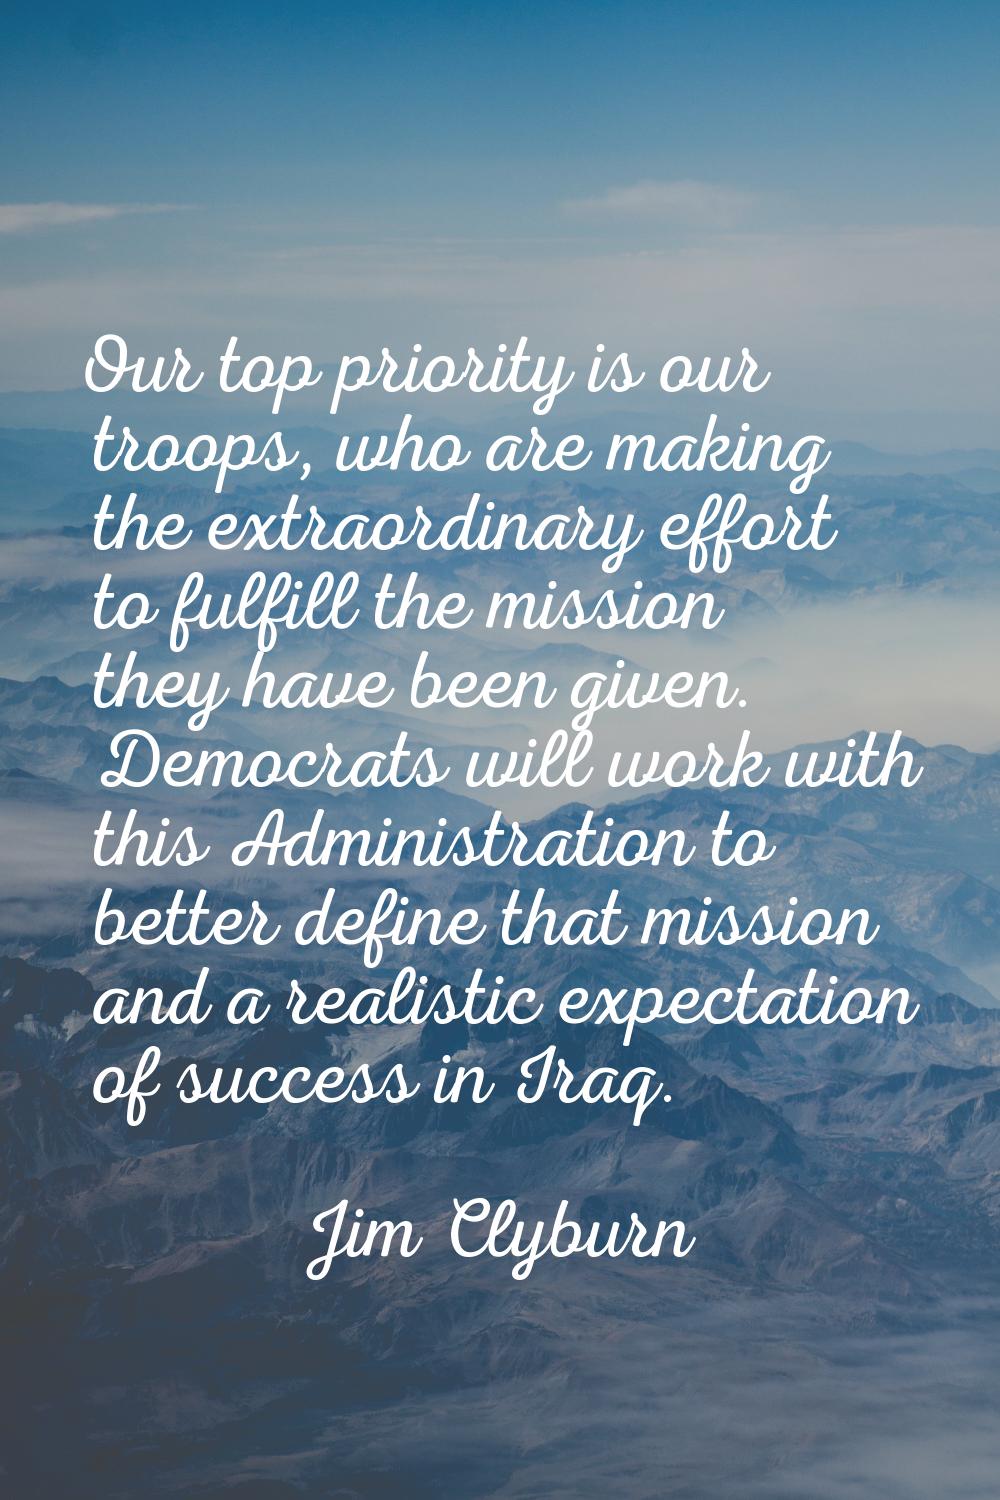 Our top priority is our troops, who are making the extraordinary effort to fulfill the mission they